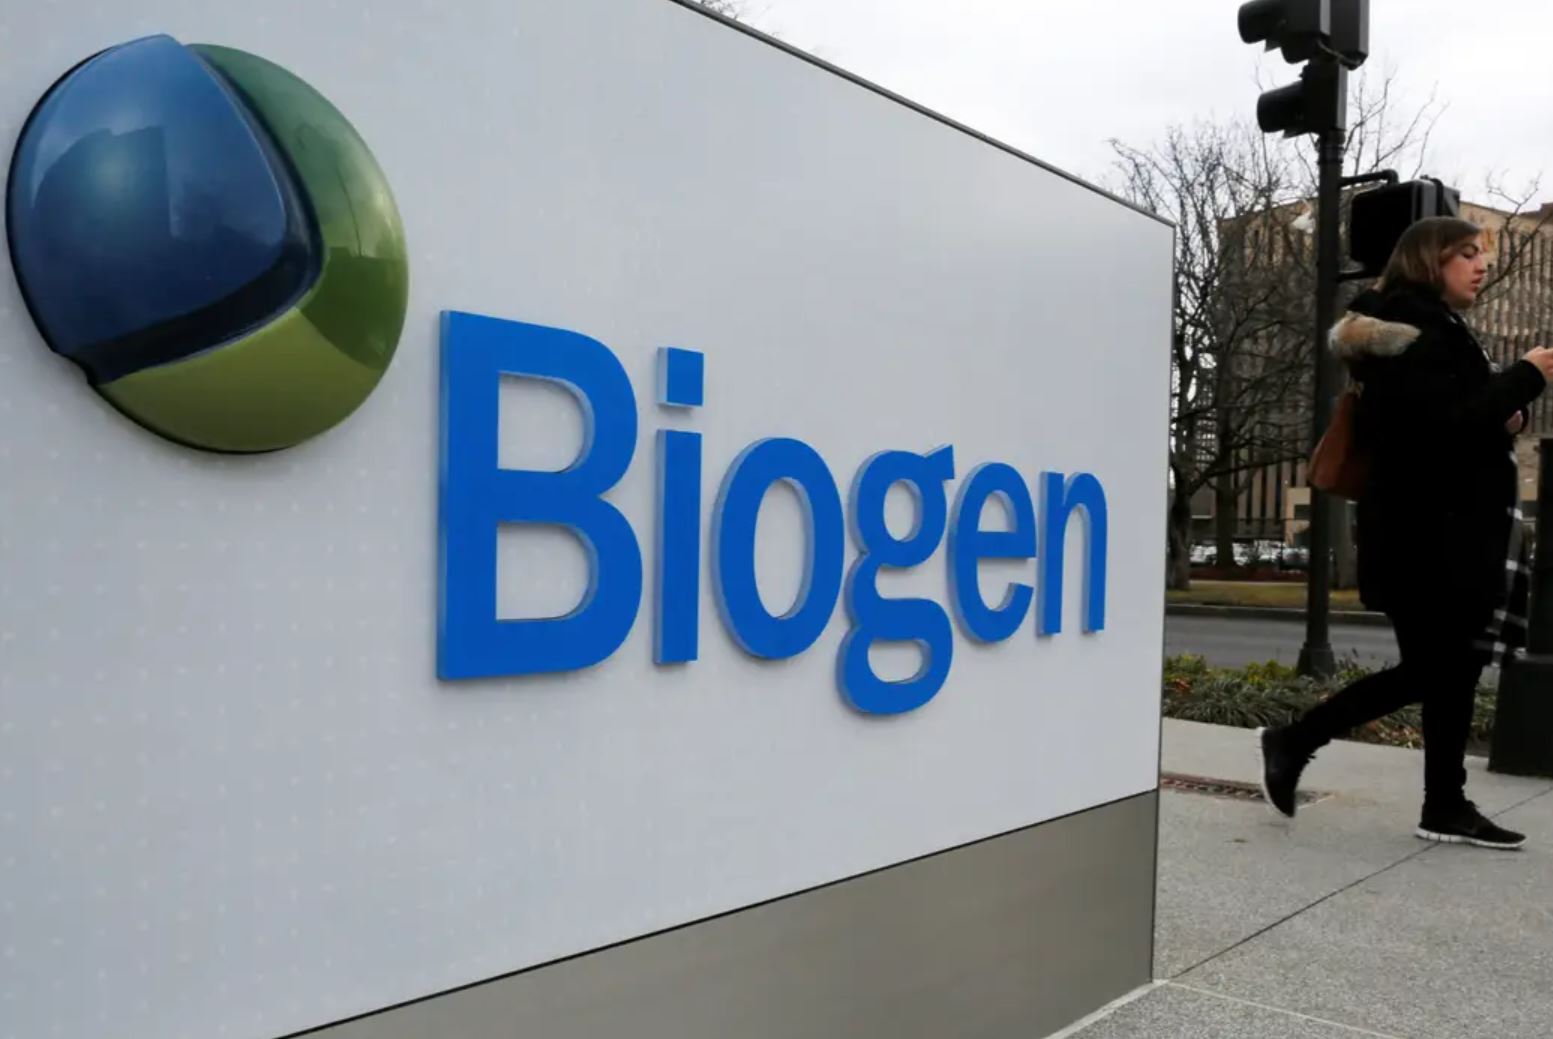 Biogen collaborates to discover novel targets for neurodegenerative and neurological diseases